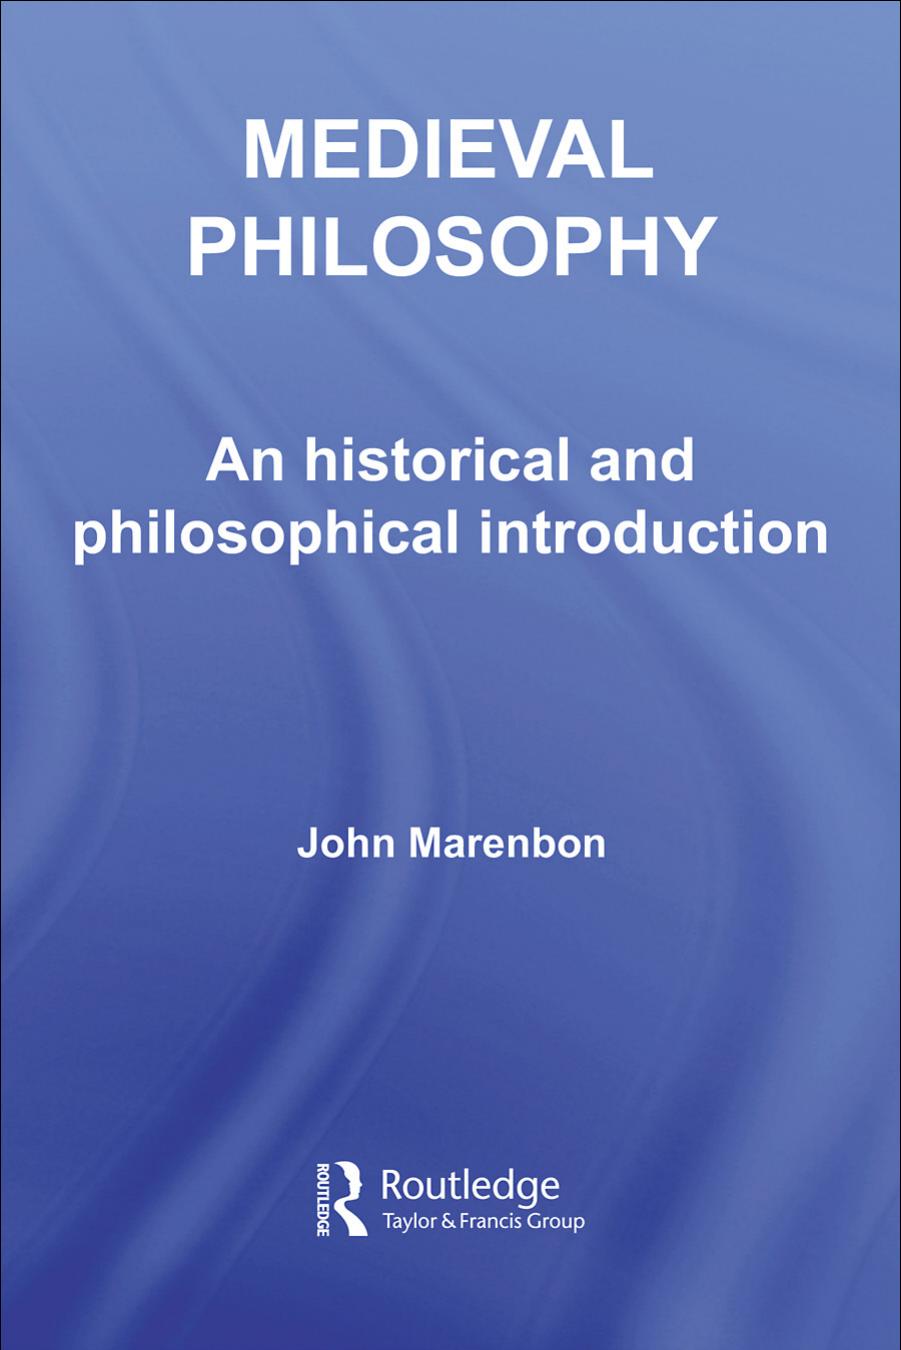 Medieval Philosophy: An Introduction